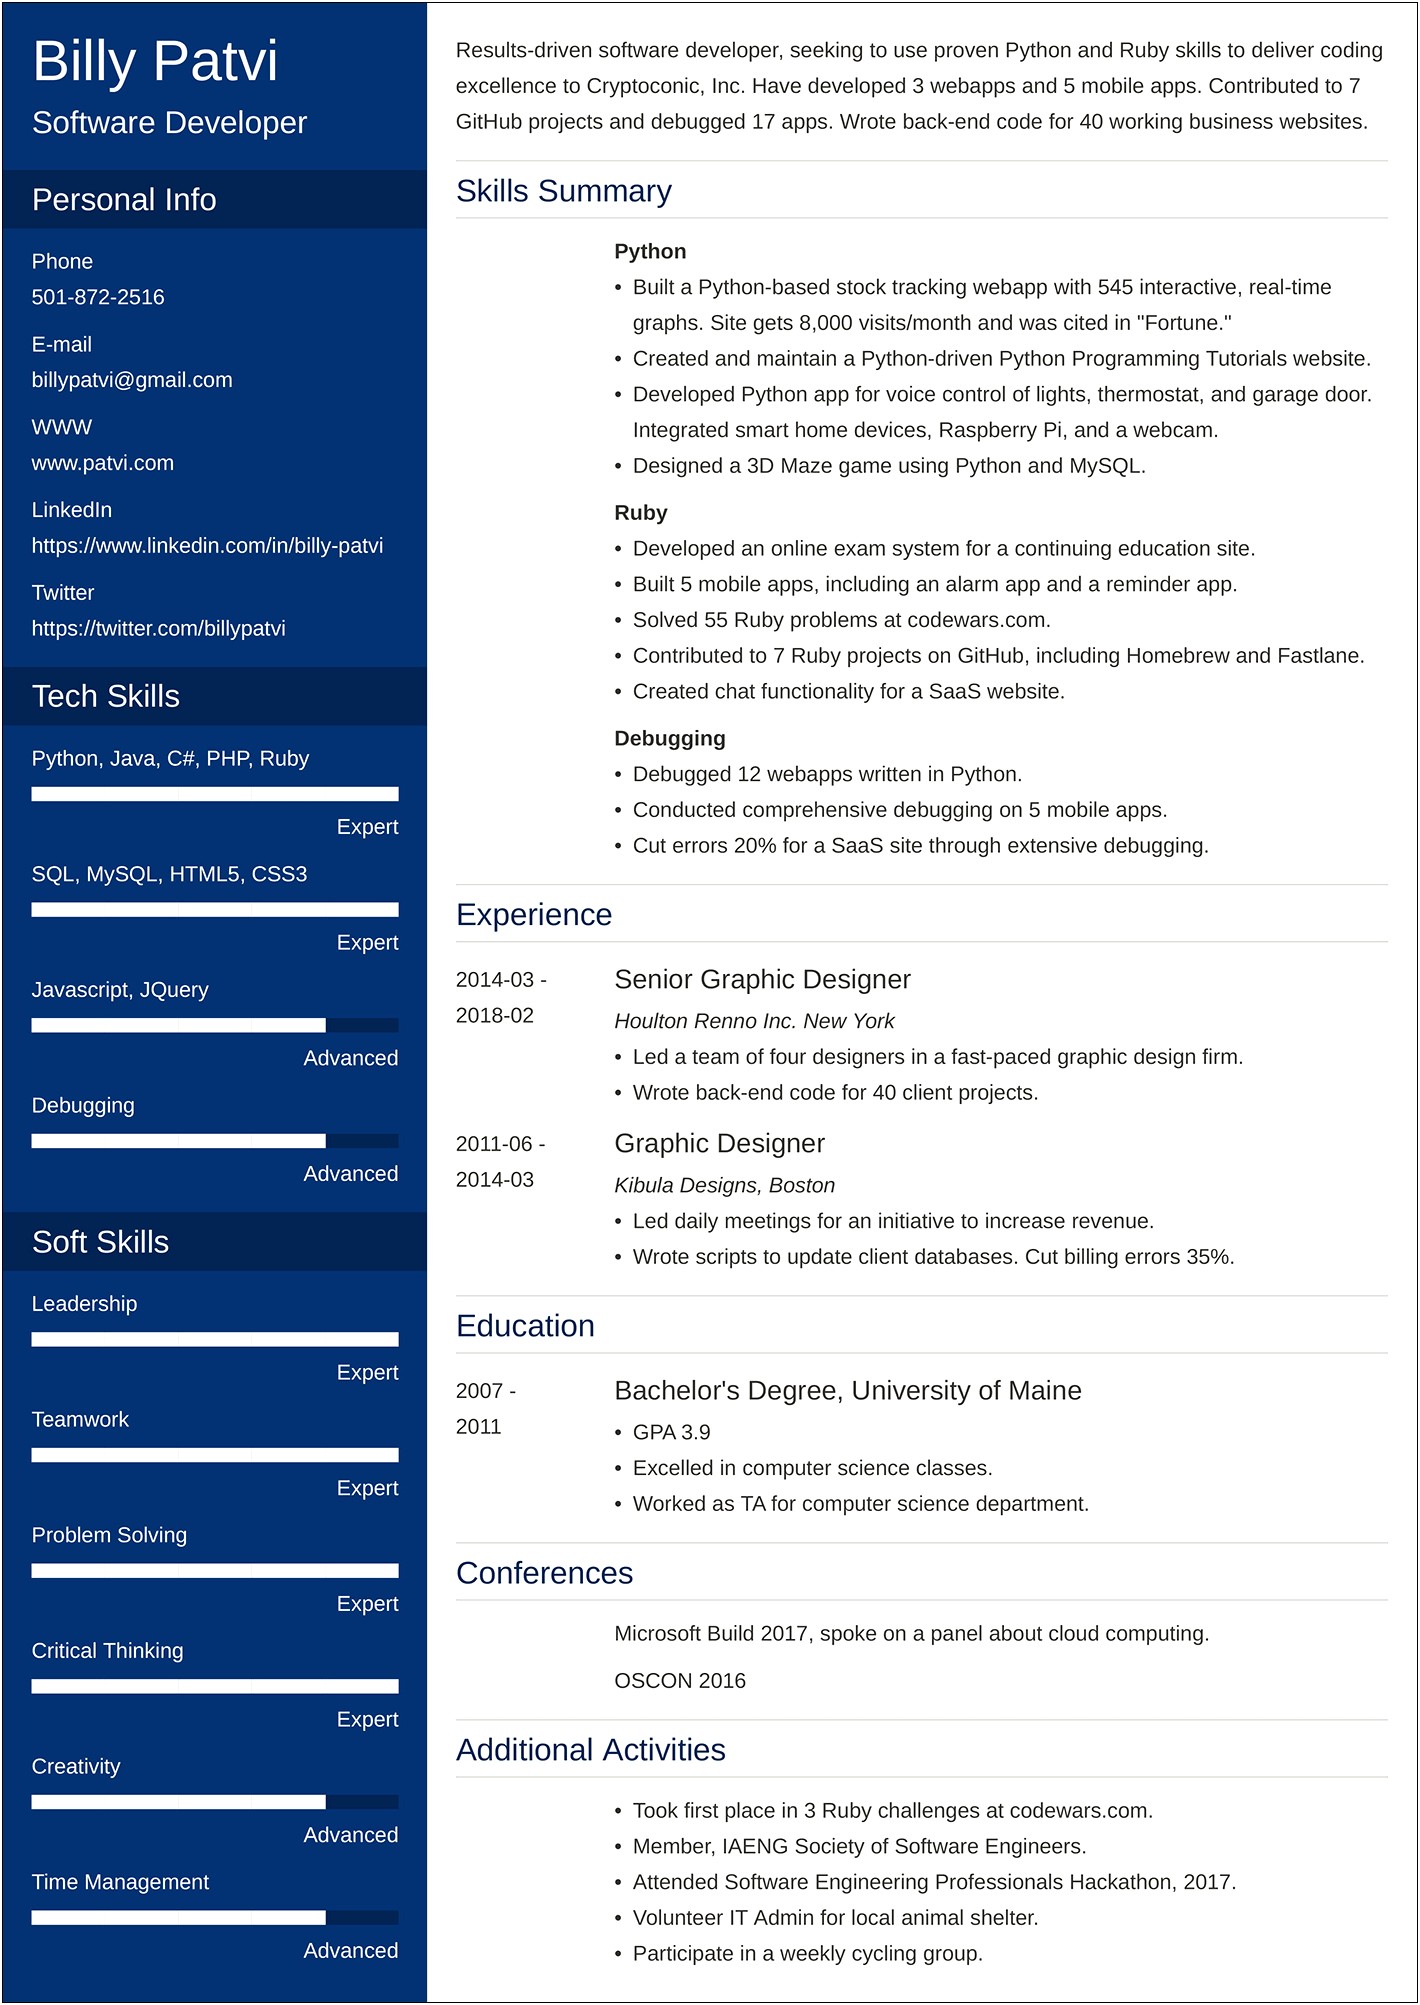 Resume Example Including Conferences And Publications